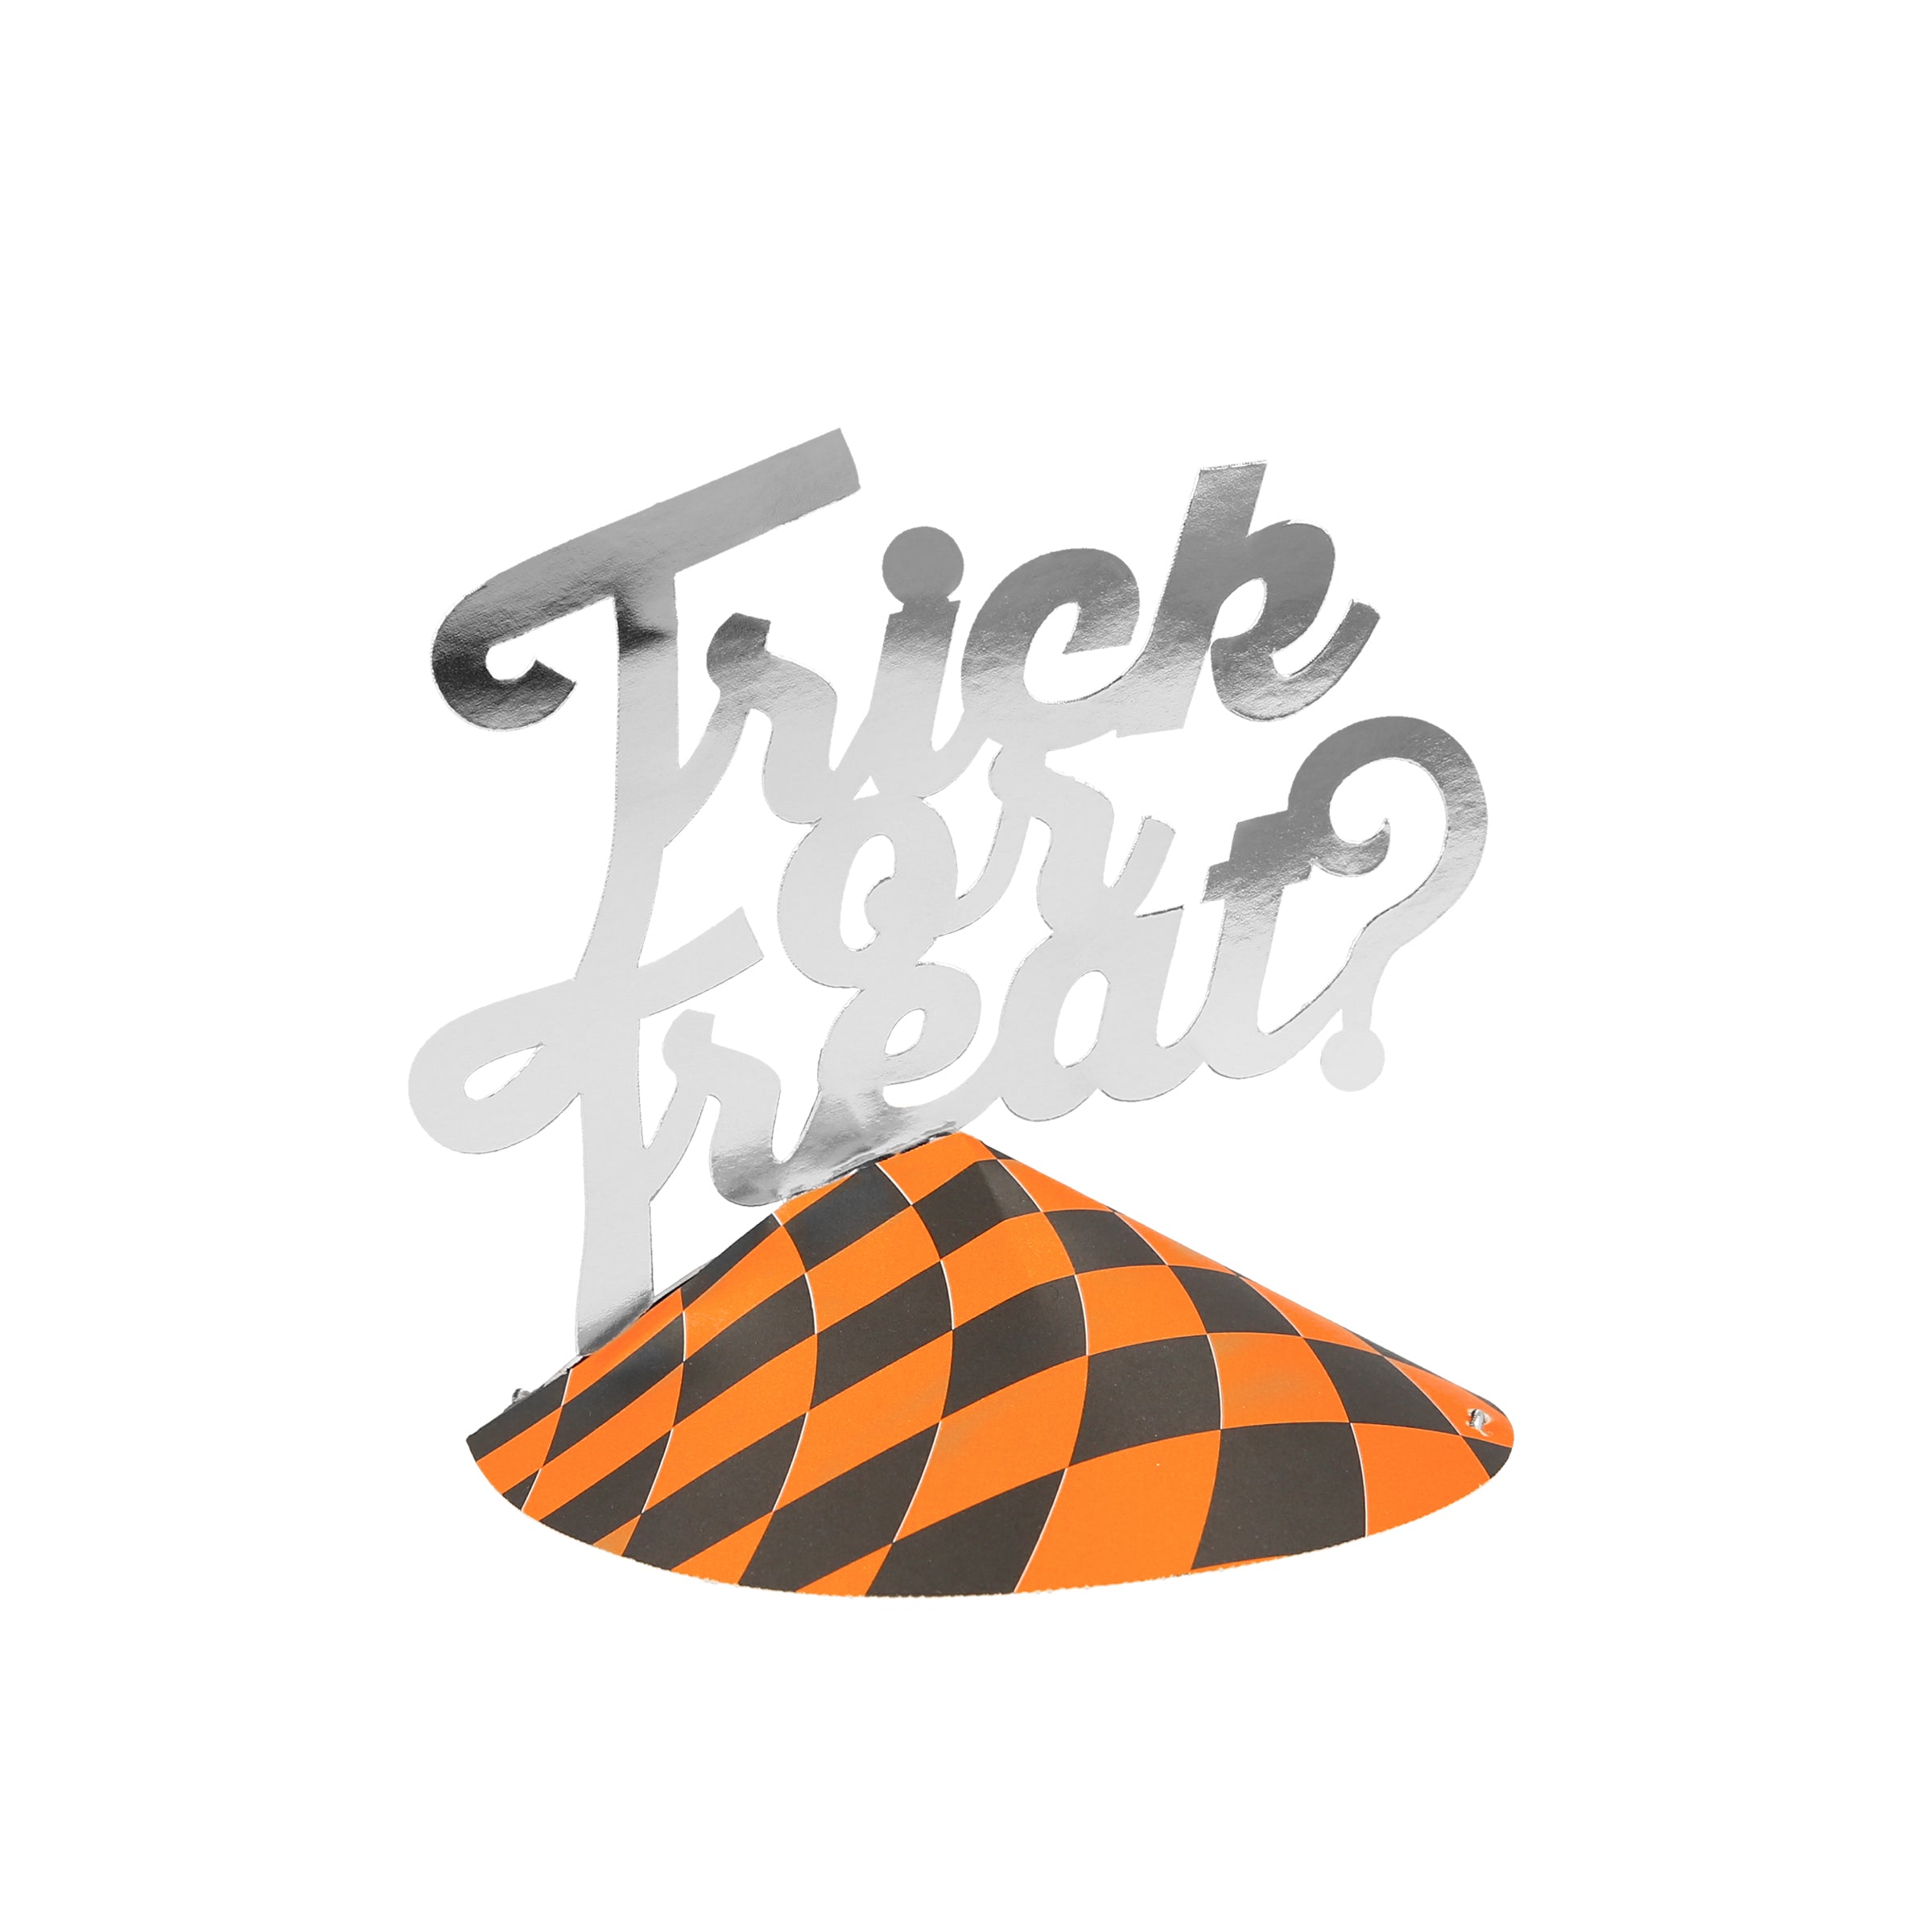 Our party hats, decorated with pumpkins, spiders and Trick or Treat? wording, are the perfect Halloween accessory.